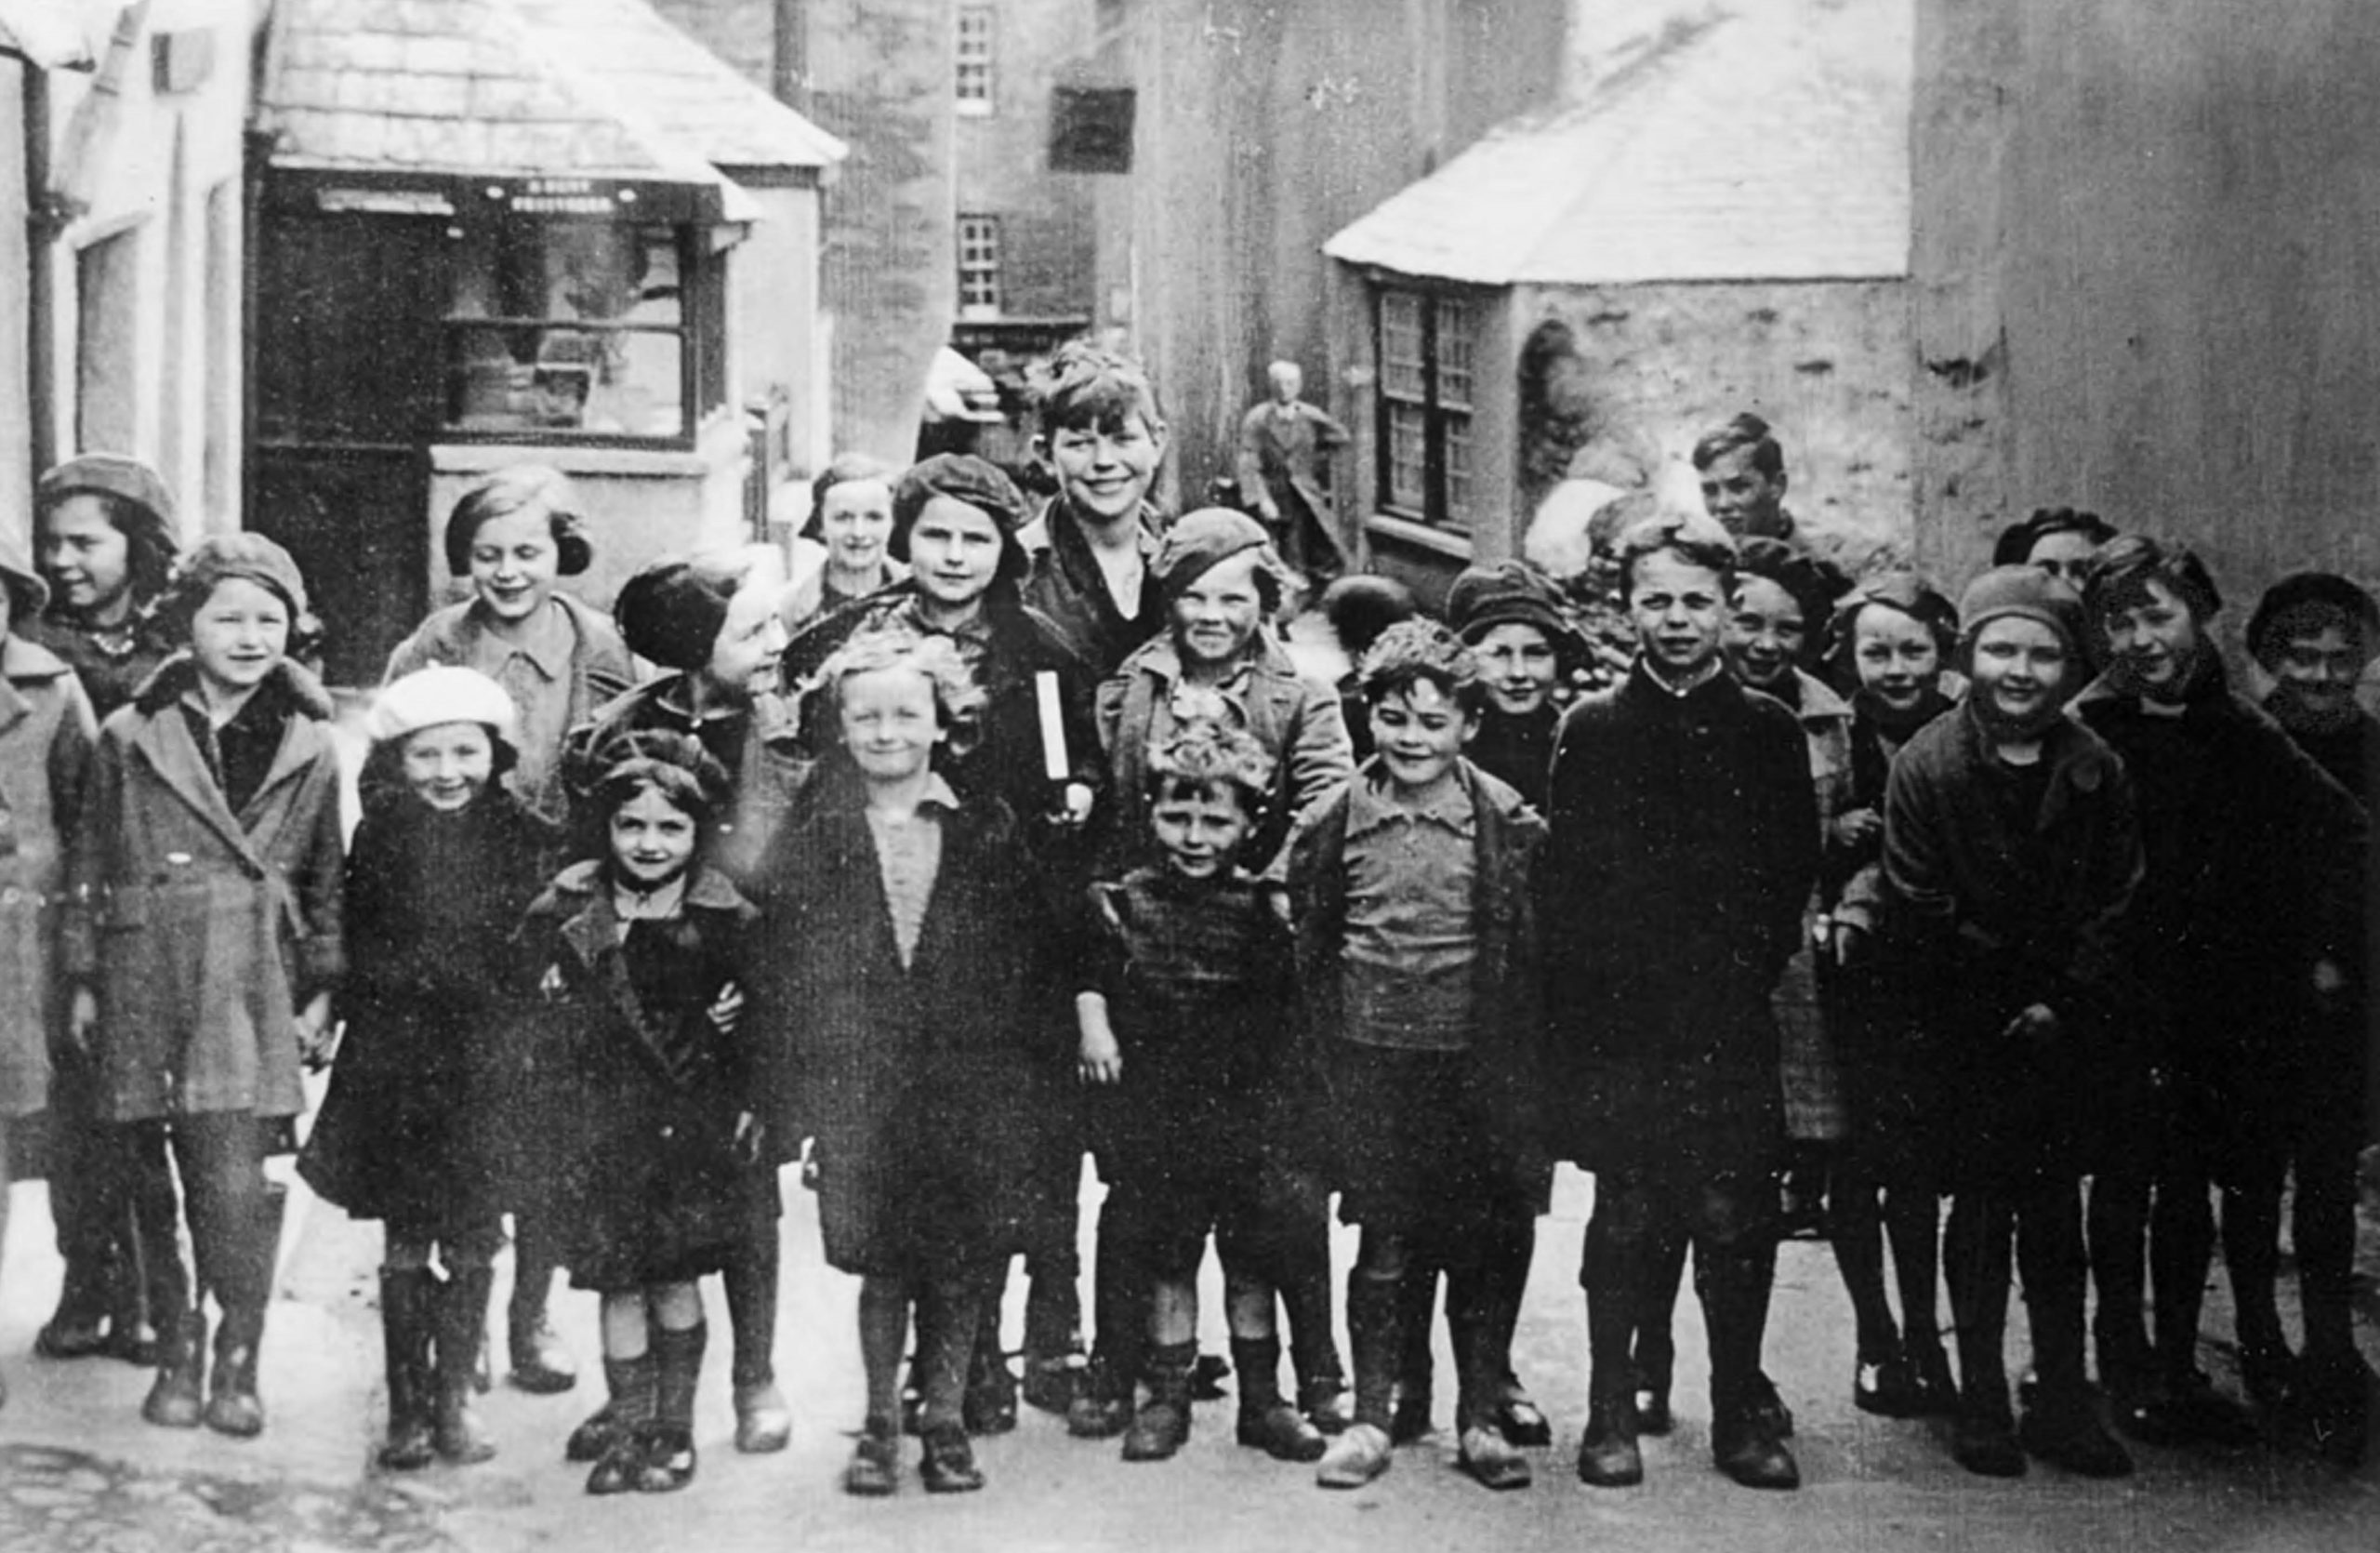 The children just out of school around 1940